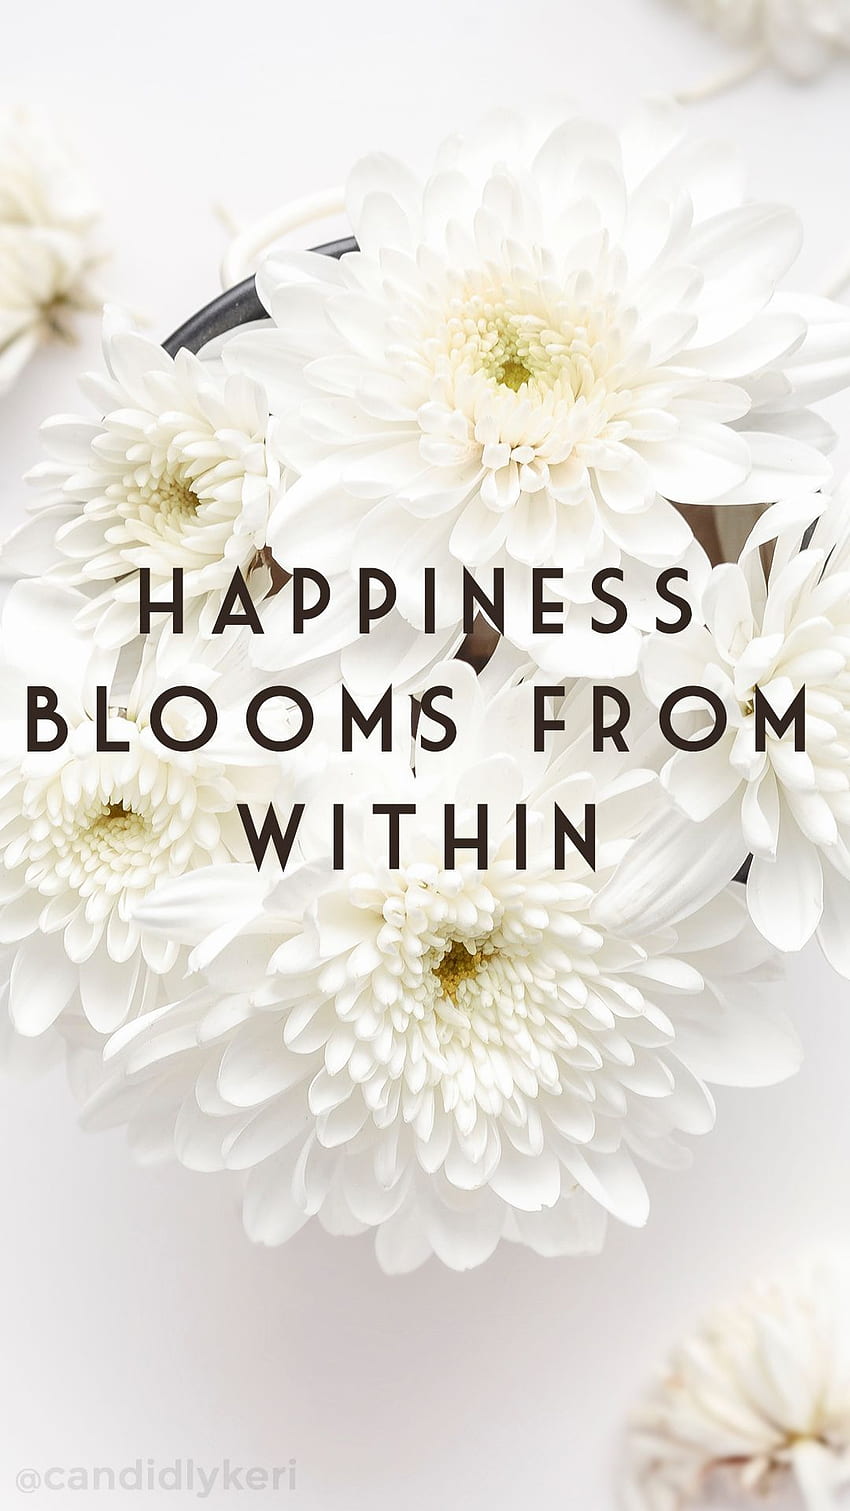 Happiness blooms from within daisy flowers quote inspirational, Happy Flowers HD phone wallpaper